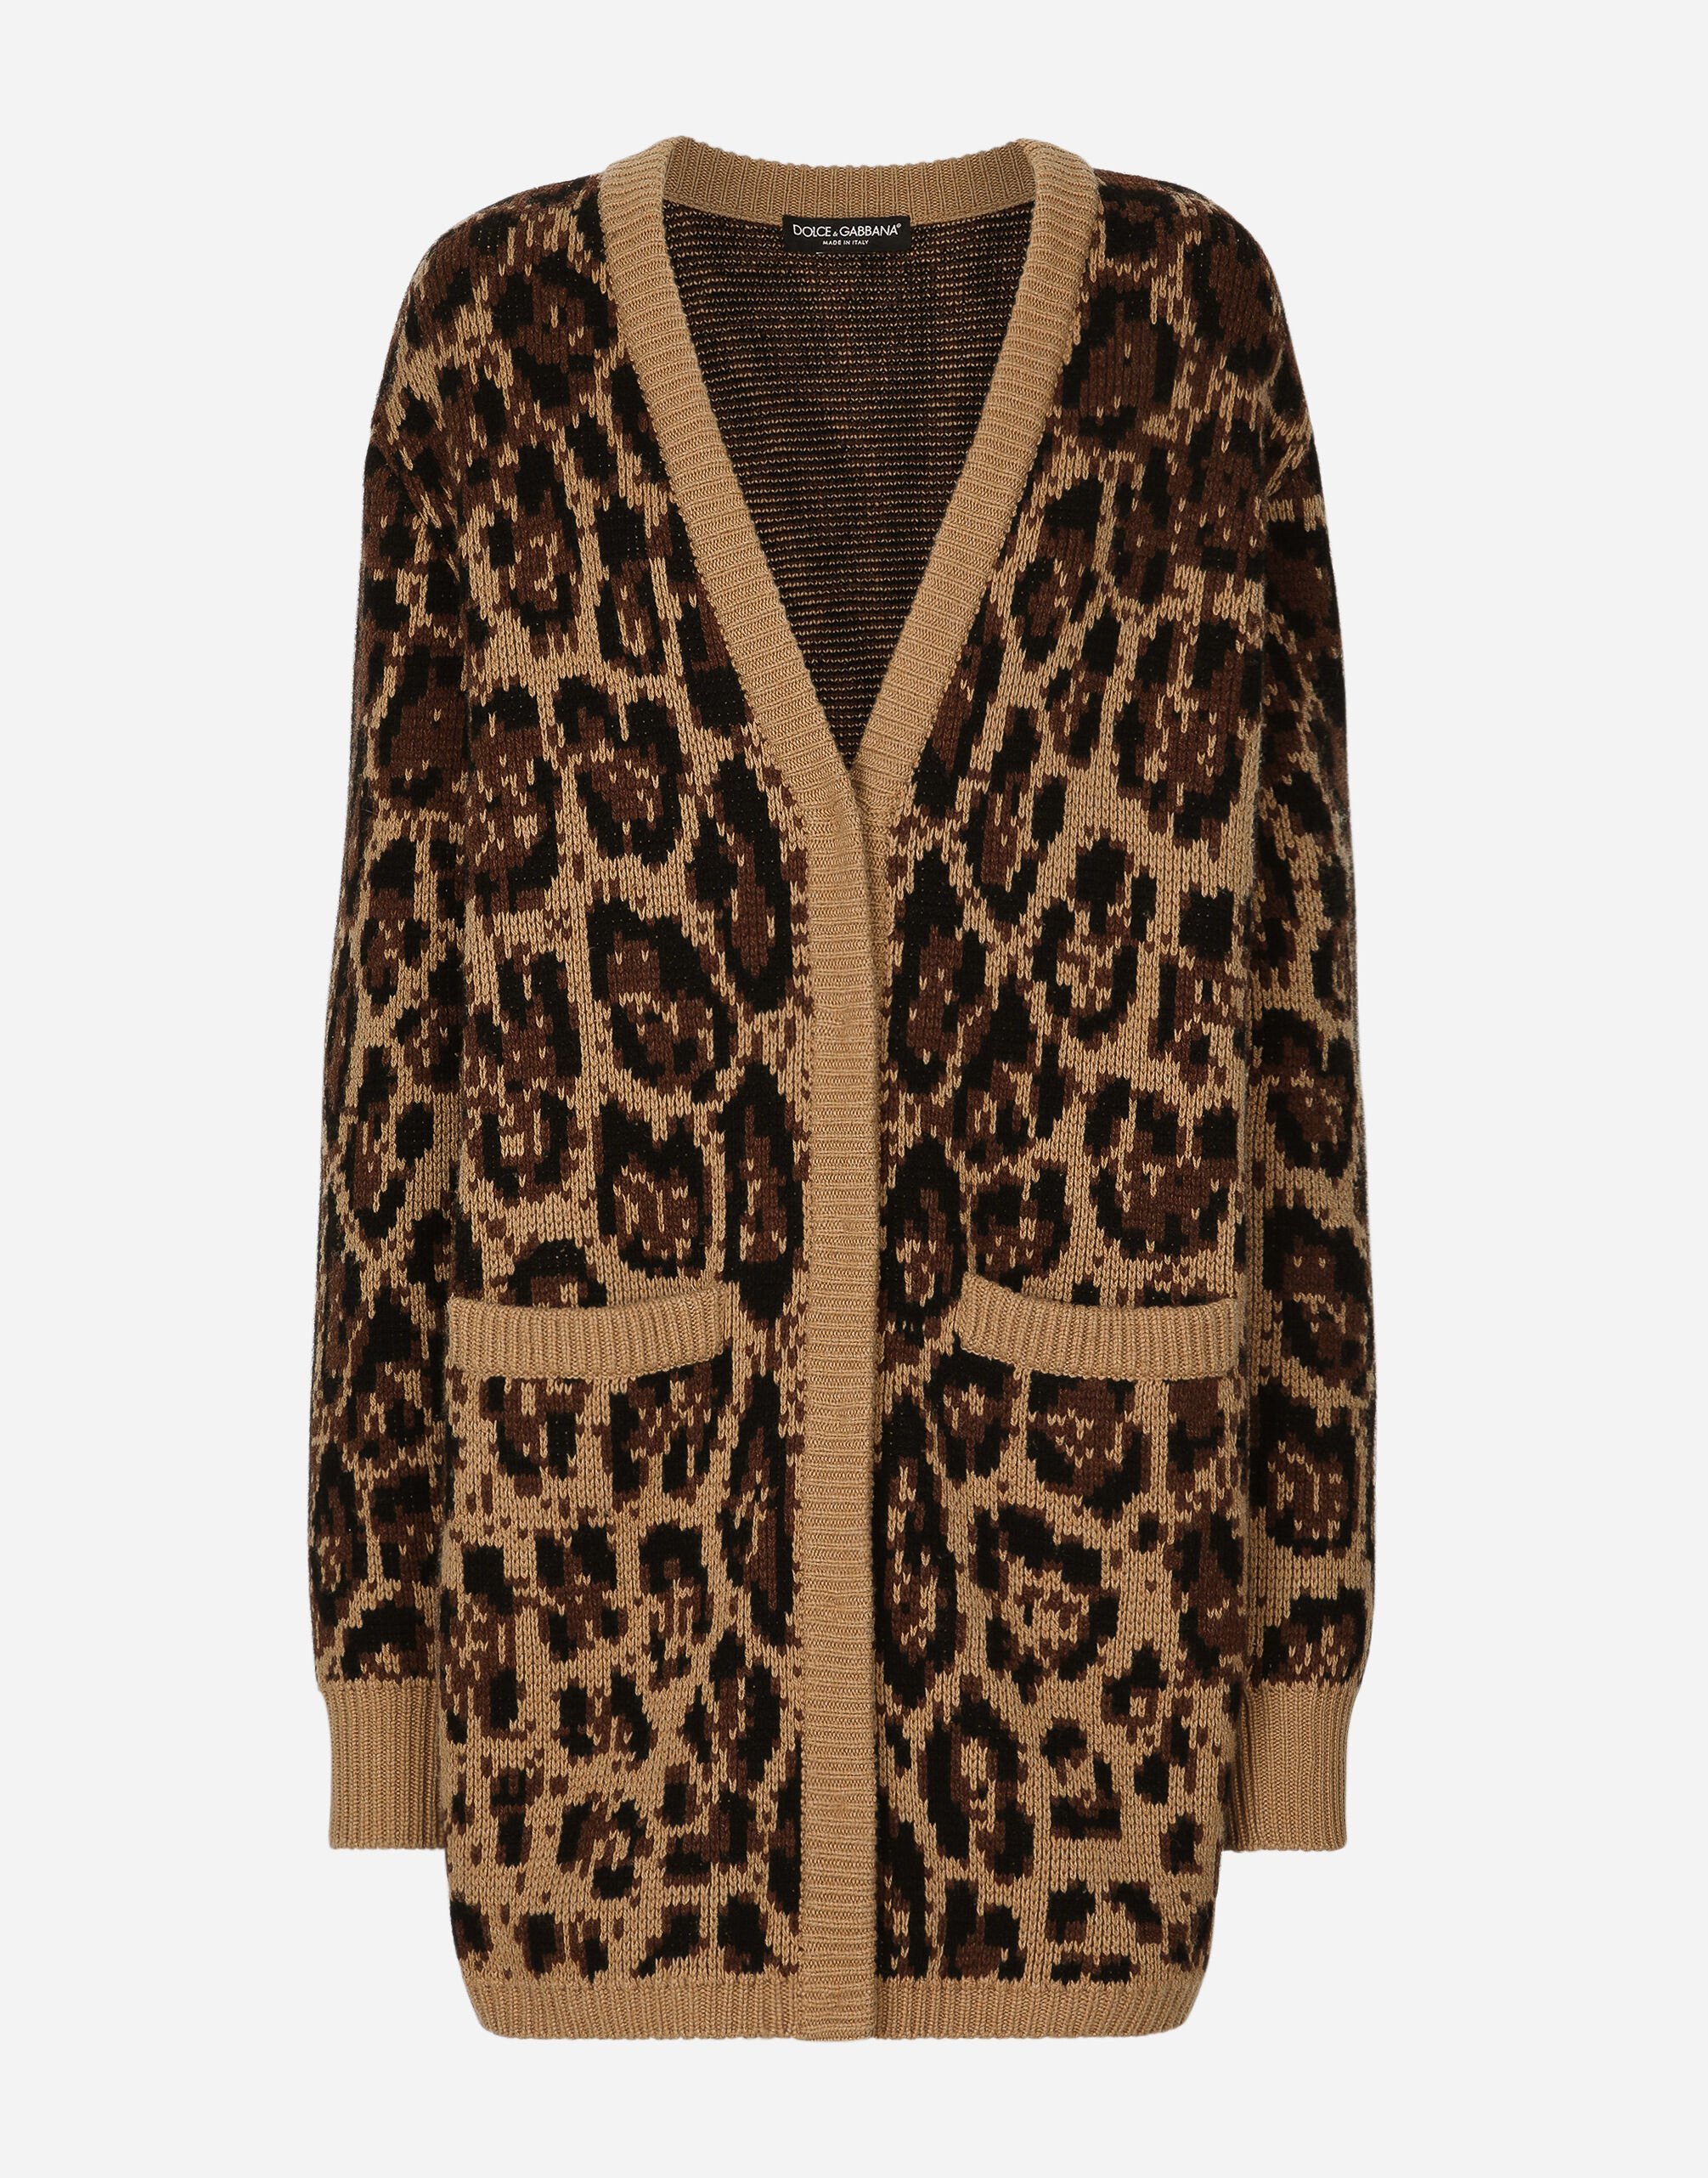 Dolce&Gabbana Long wool and cashmere cardigan with jacquard leopard design Animal Print BB6003AO043